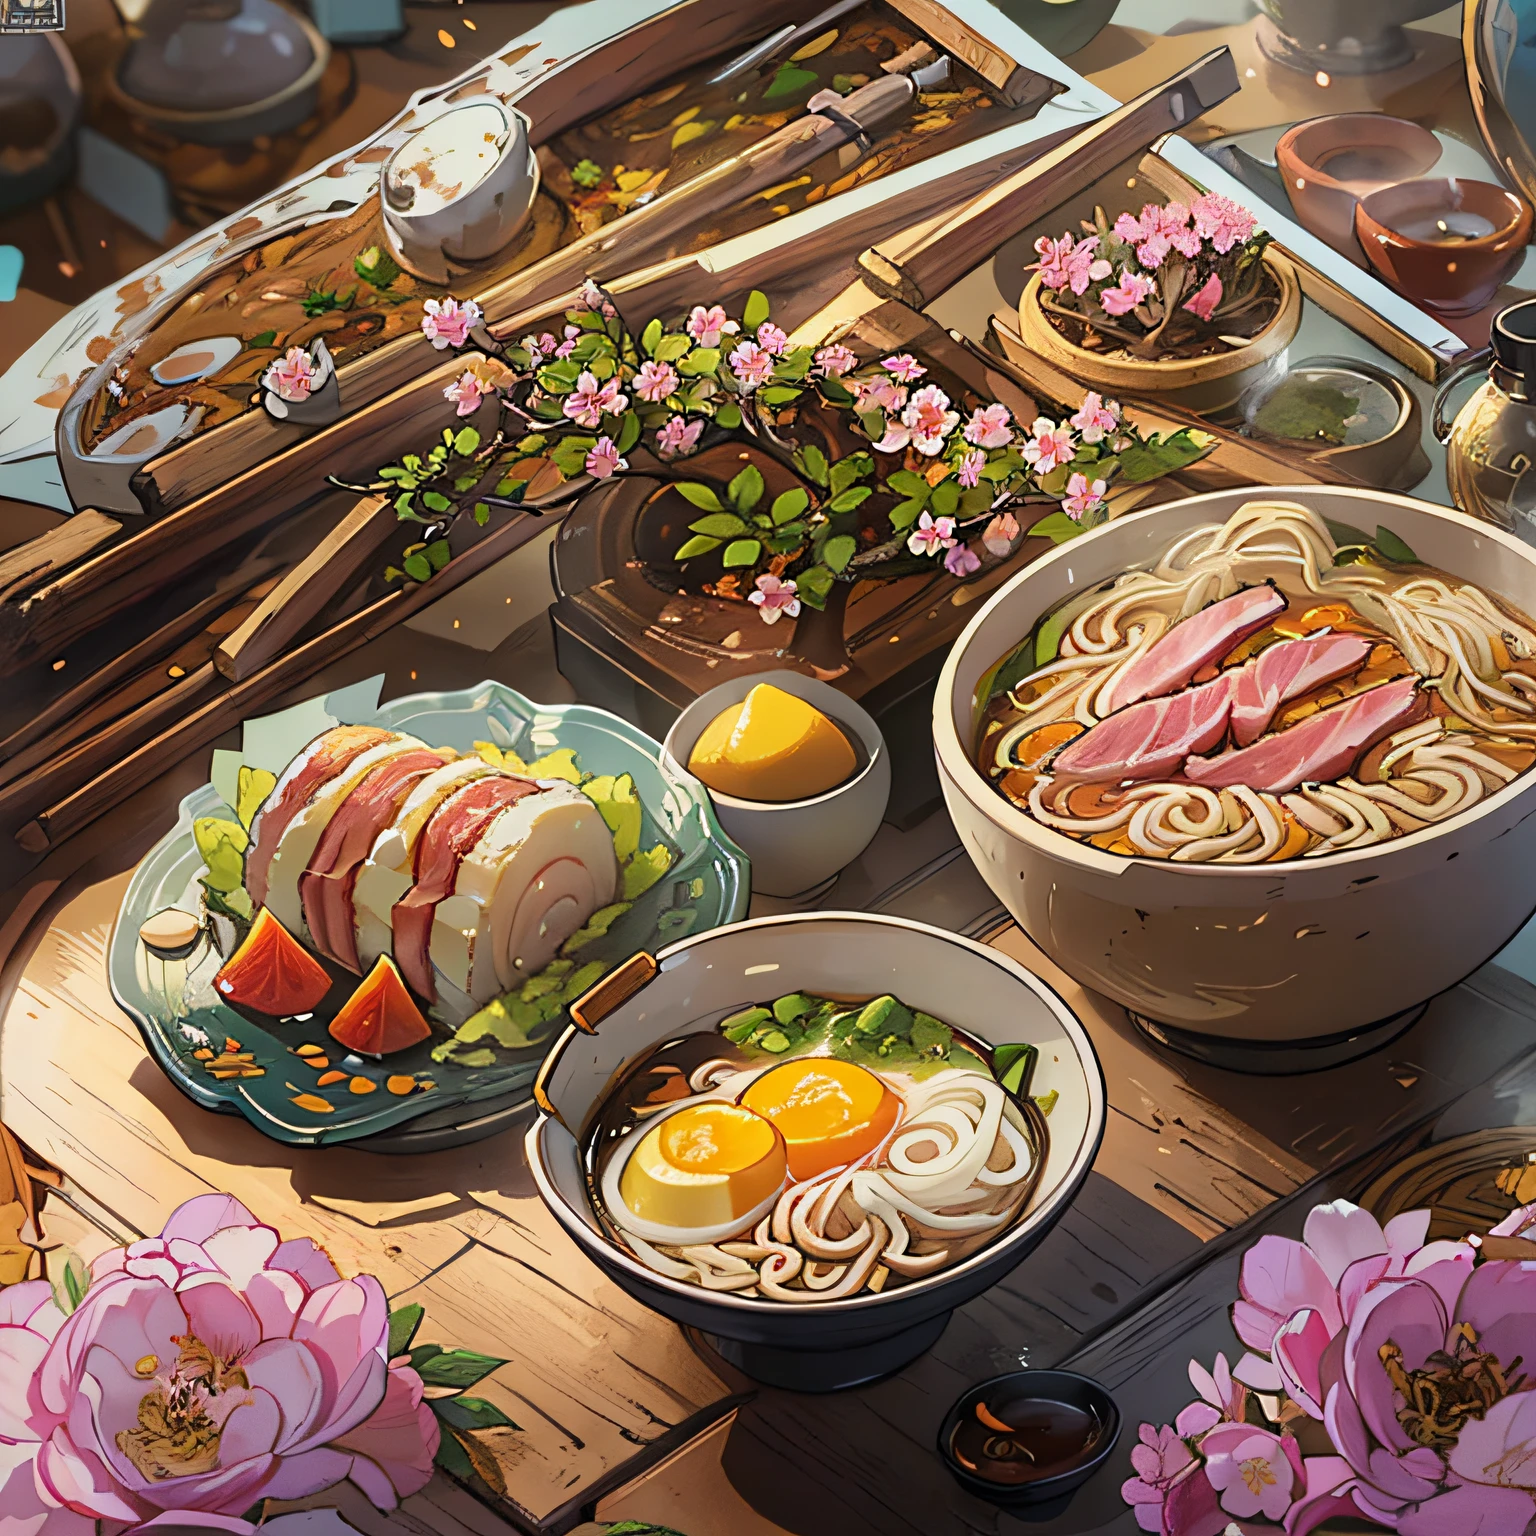 one big Ramen whit half boiled egg, slice of boiled ham,
Food stick
(still life), (japanese autumn, sacura blossom, rock garden, bonsai)
fog, haze, high detail, ultradetailed, intricately detailed, fine details, hyperdetailed, cinematic, hyperrealistic, 
hyper realism soft light, studio lighting, diffused soft lighting, shallow depth of field, sharp focus bokeh,
raytracing, subsurface scattering, diffused soft lighting, 
ultradetailed, (intricately detailed, fine details, hyperdetailed), cinematic, hyperrealistic,
(poster:1.6)